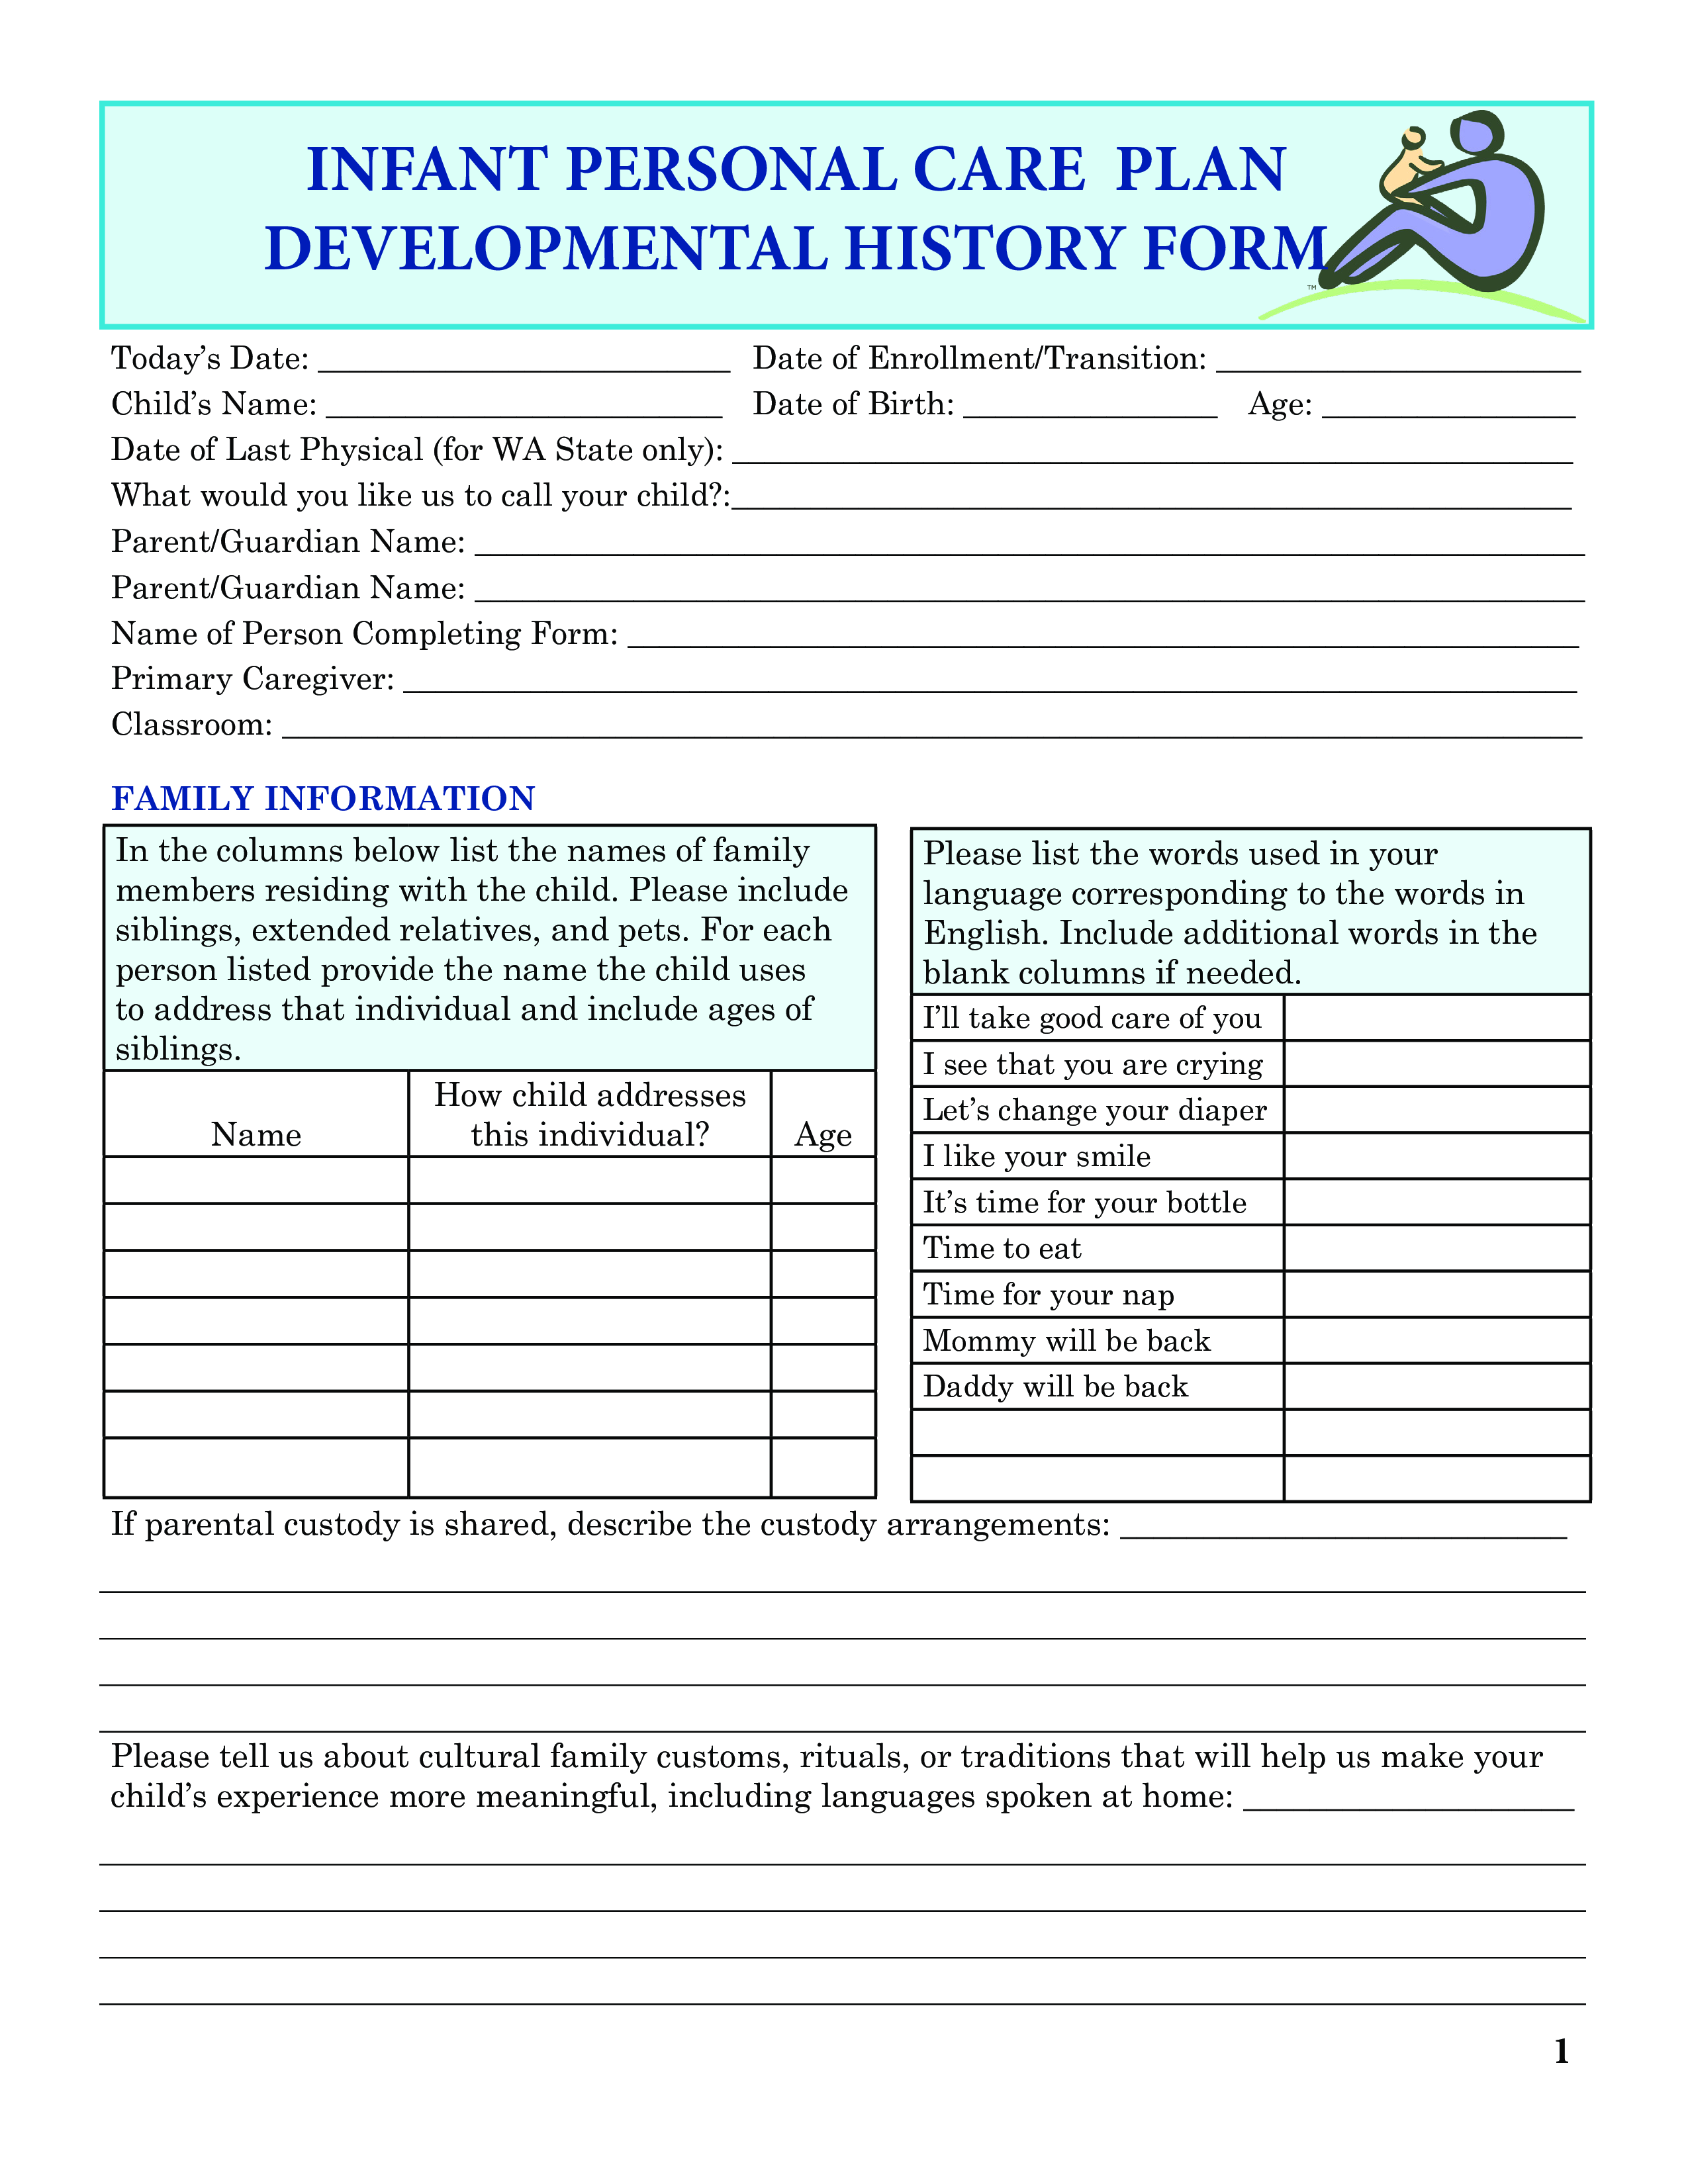 Infant Personal Care Plan main image